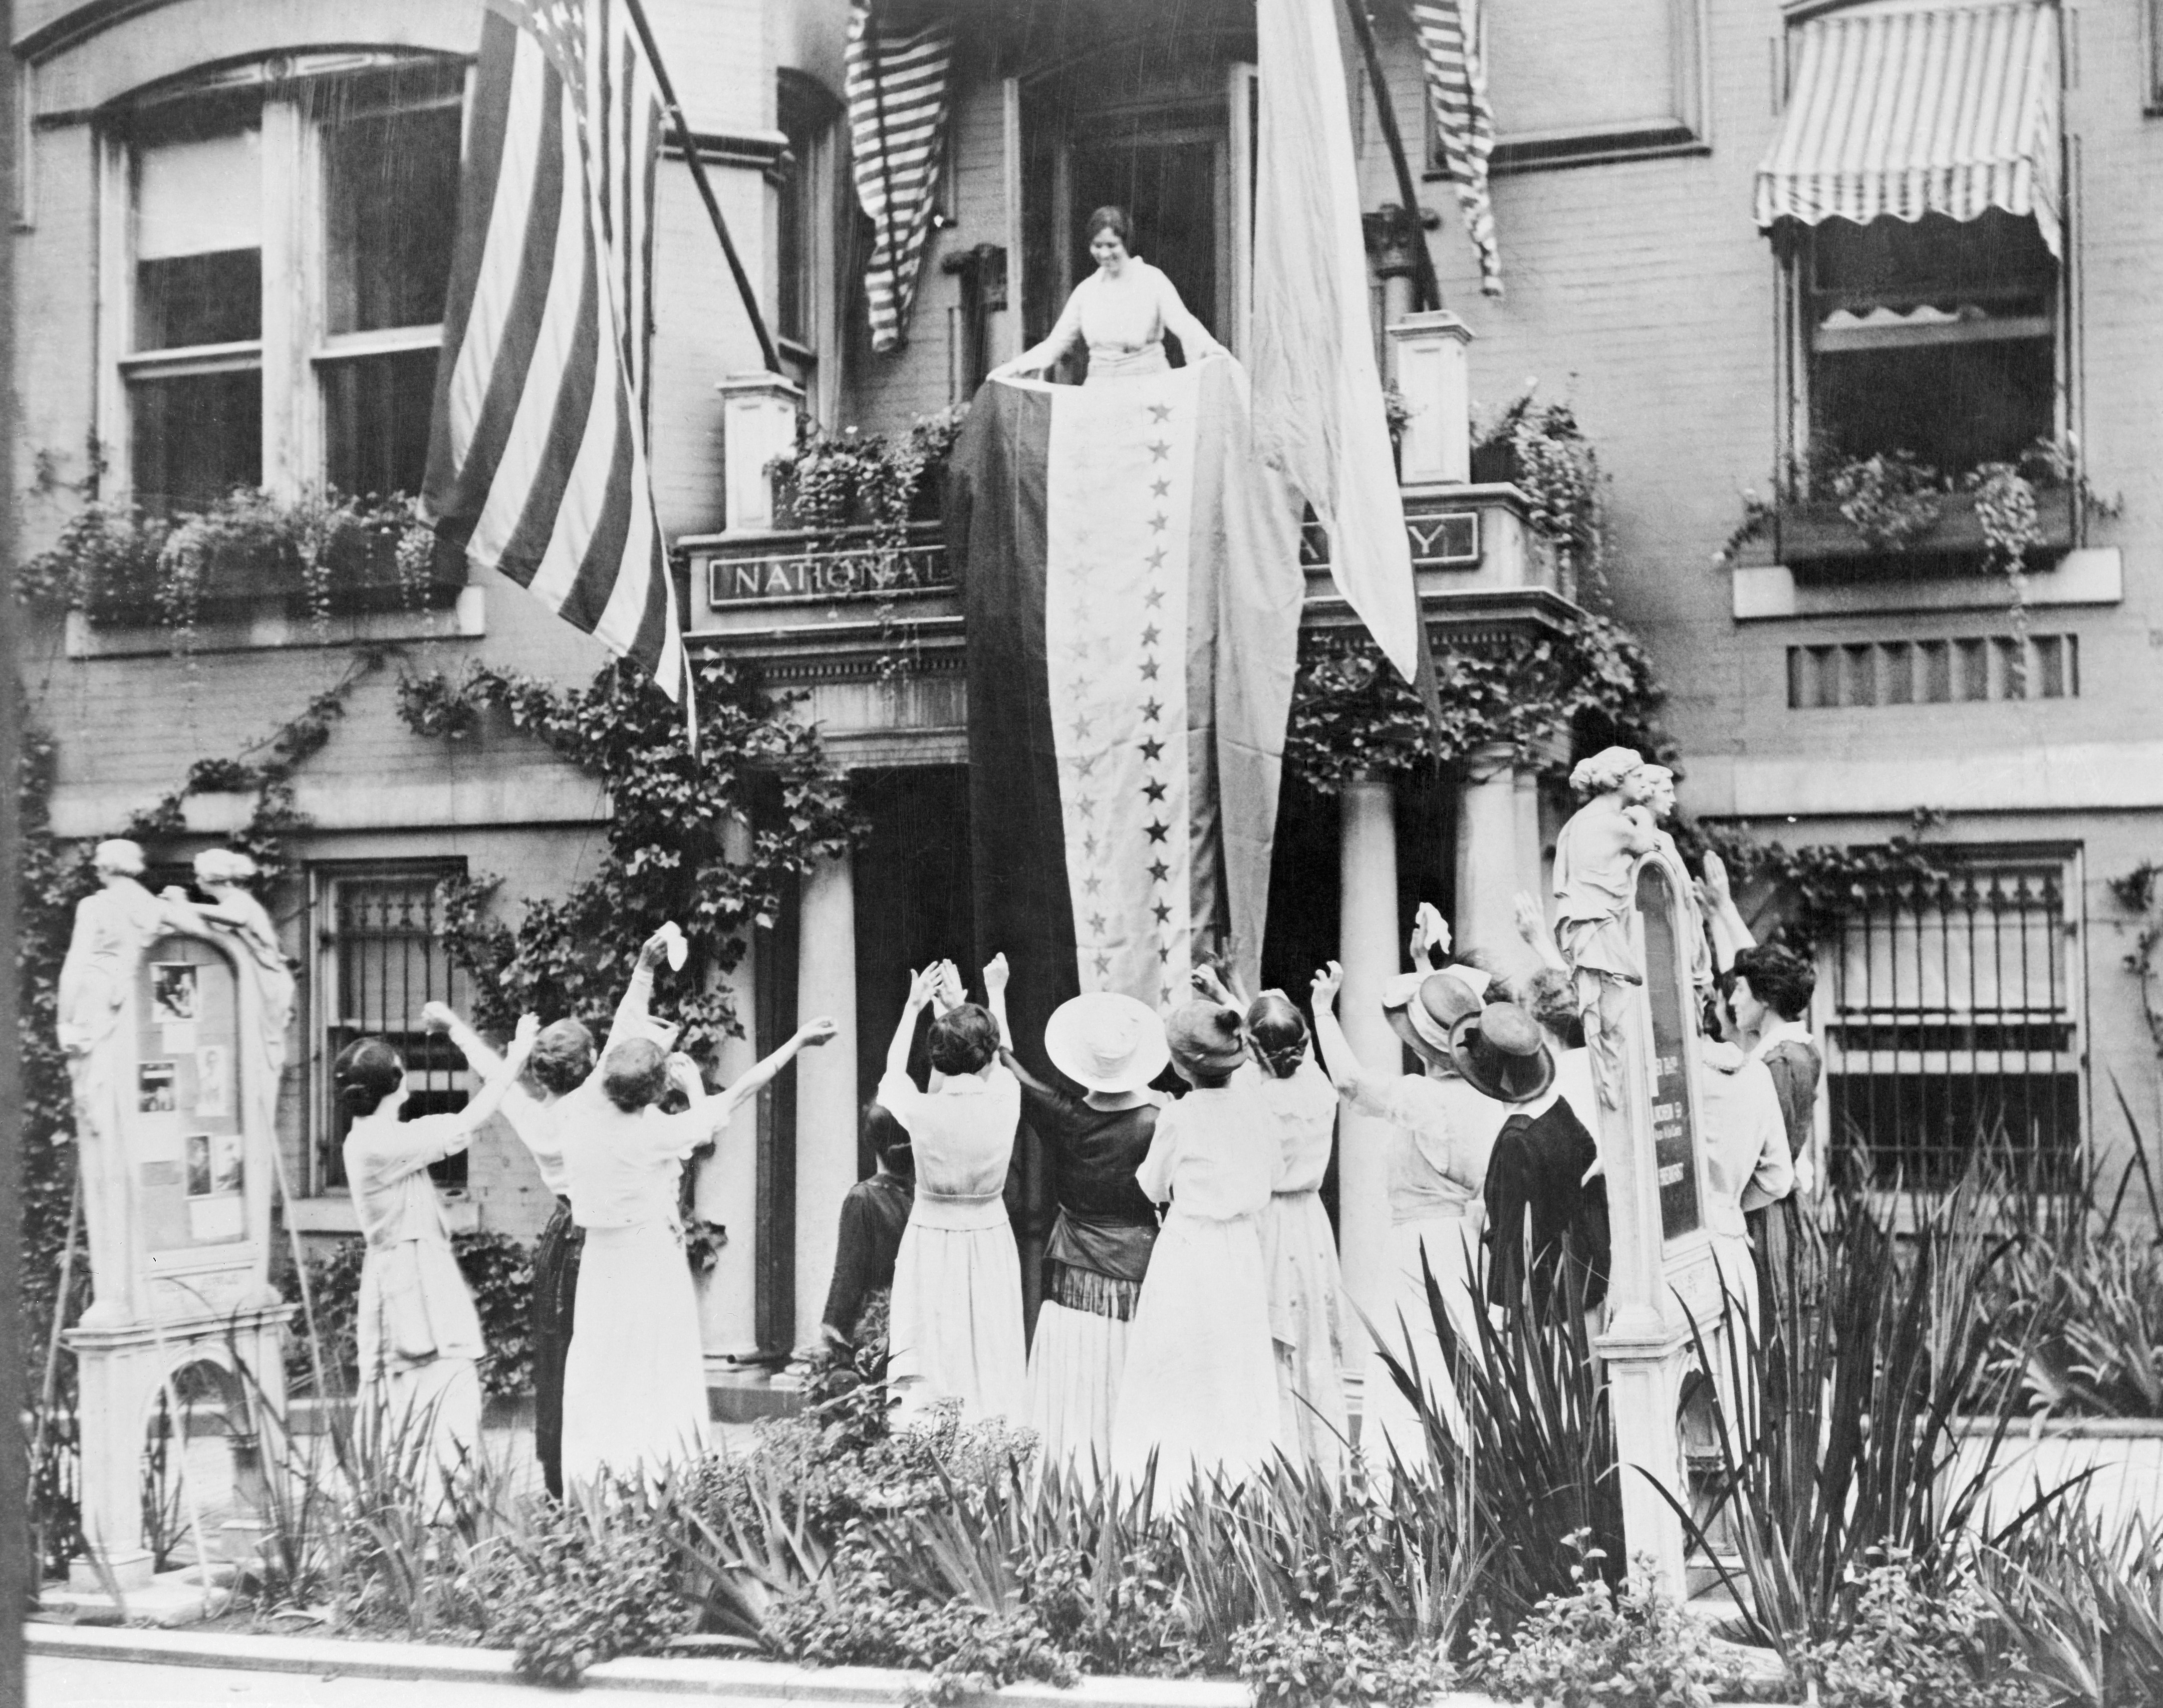 On this day in history, August 18, 1920, the 19th Amendment was ratified, giving women the right to vote.